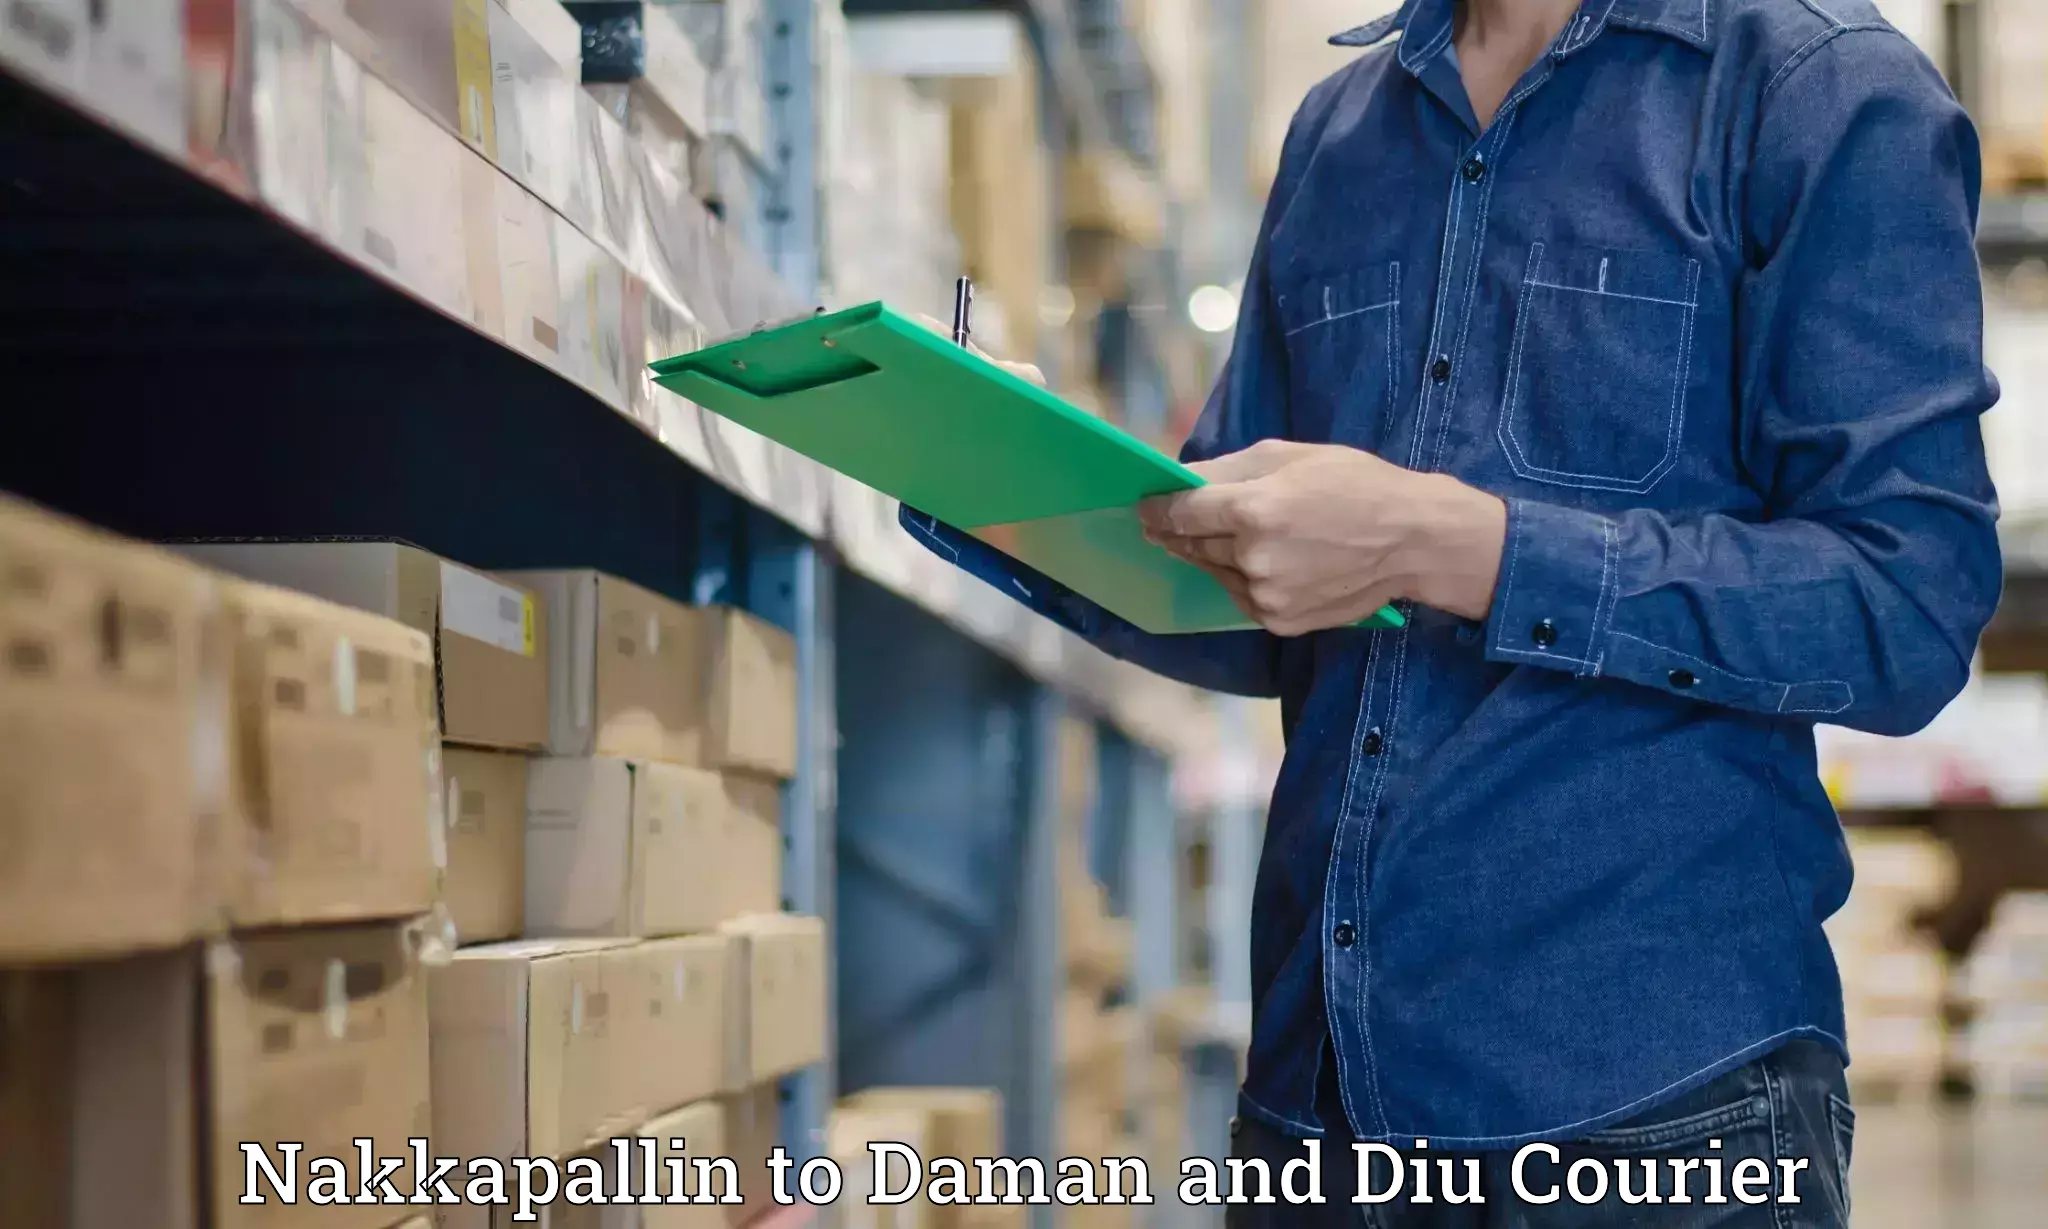 Express delivery solutions Nakkapallin to Daman and Diu